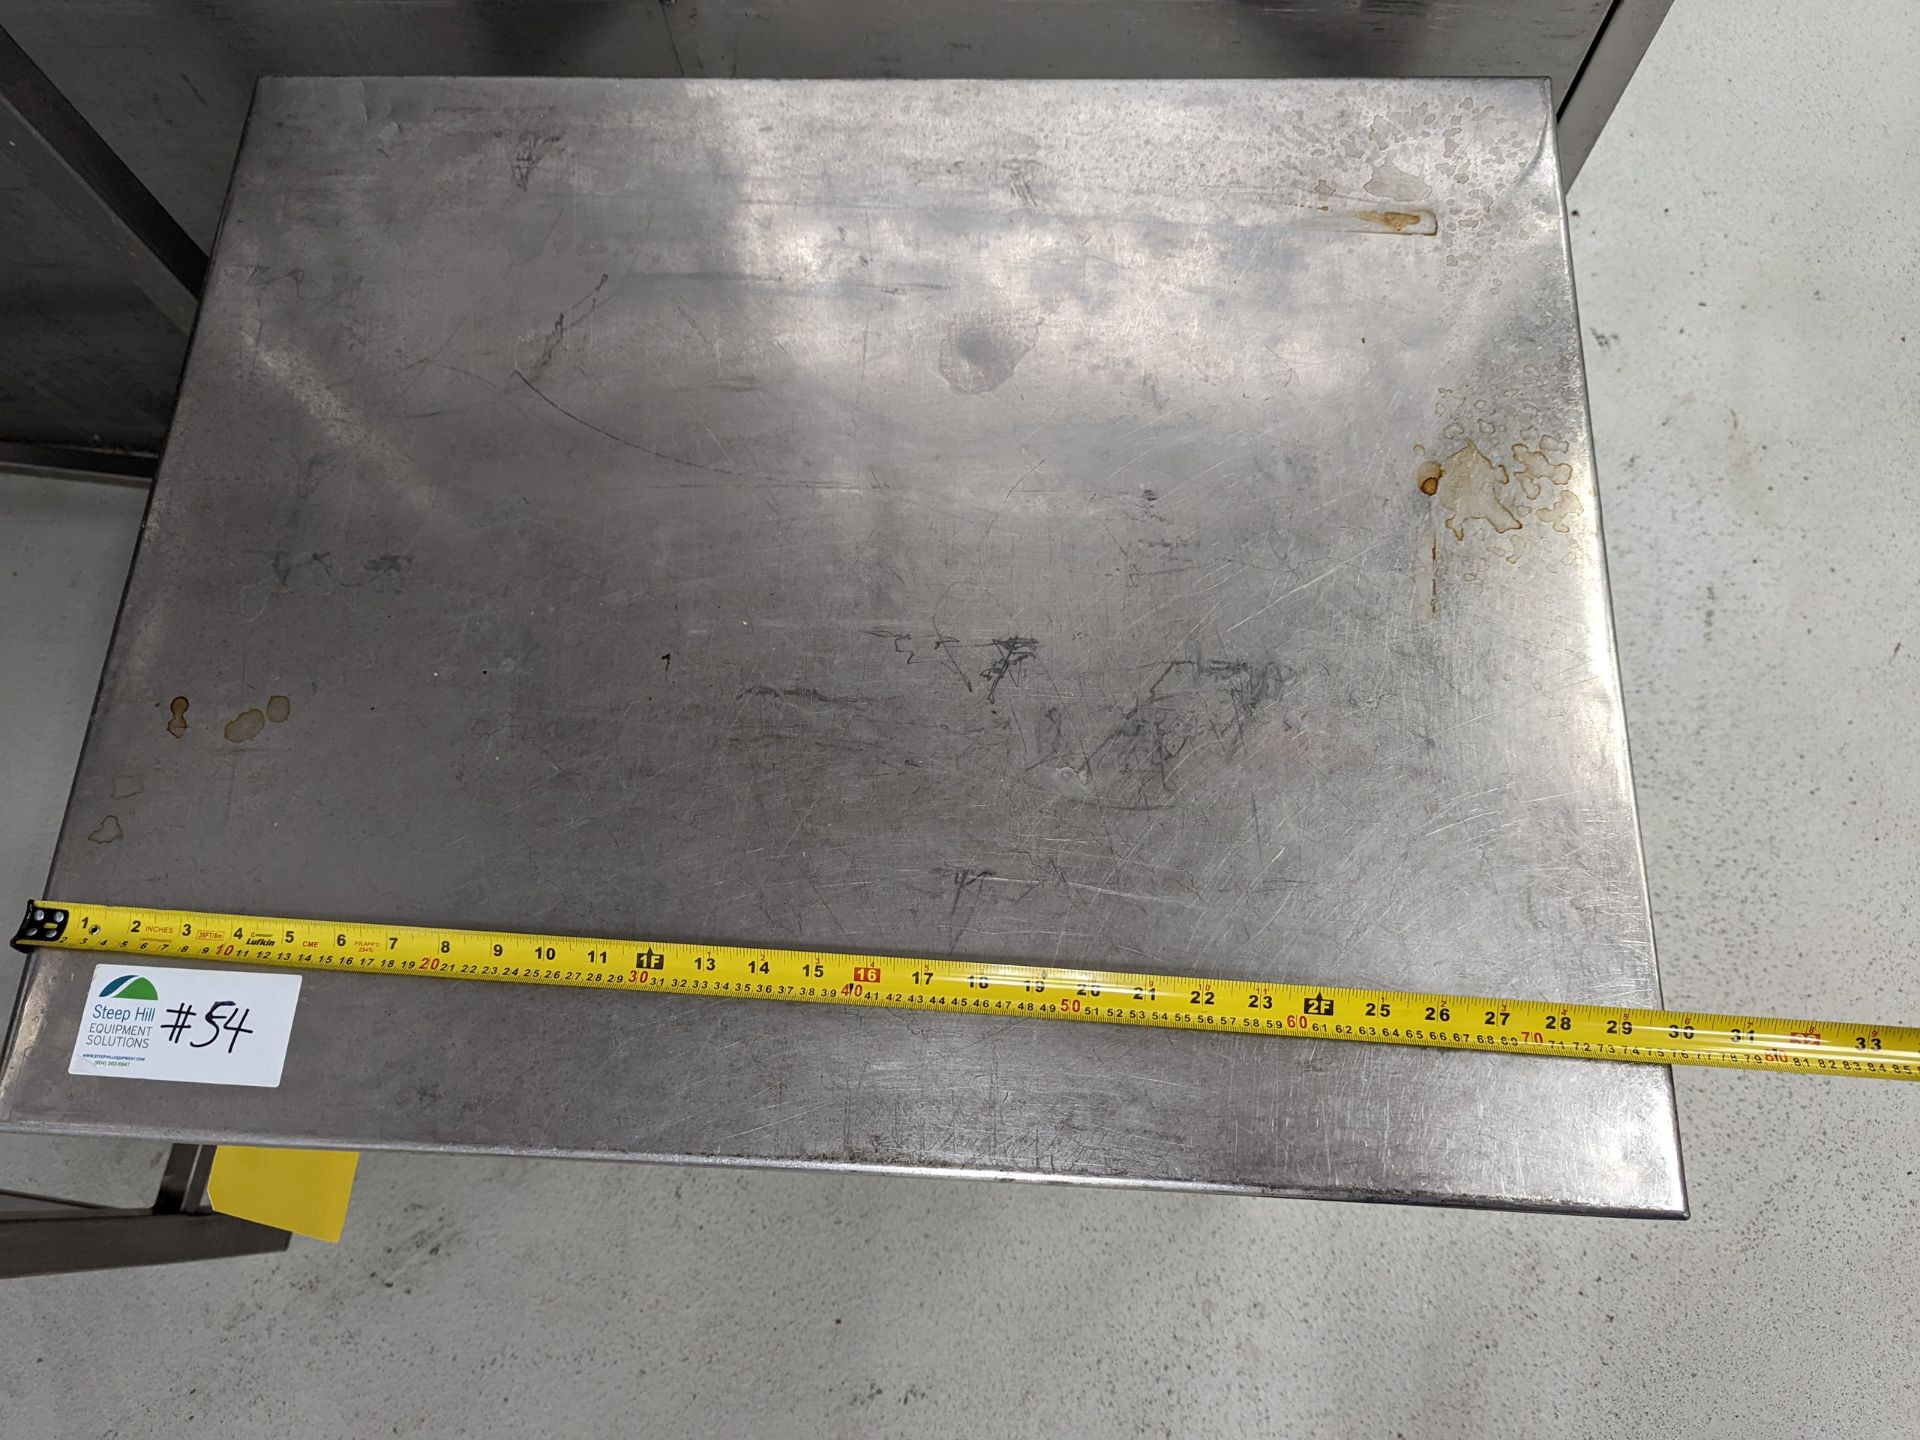 Stainless Table with adjustable legs, 30x24x27 - Image 6 of 7